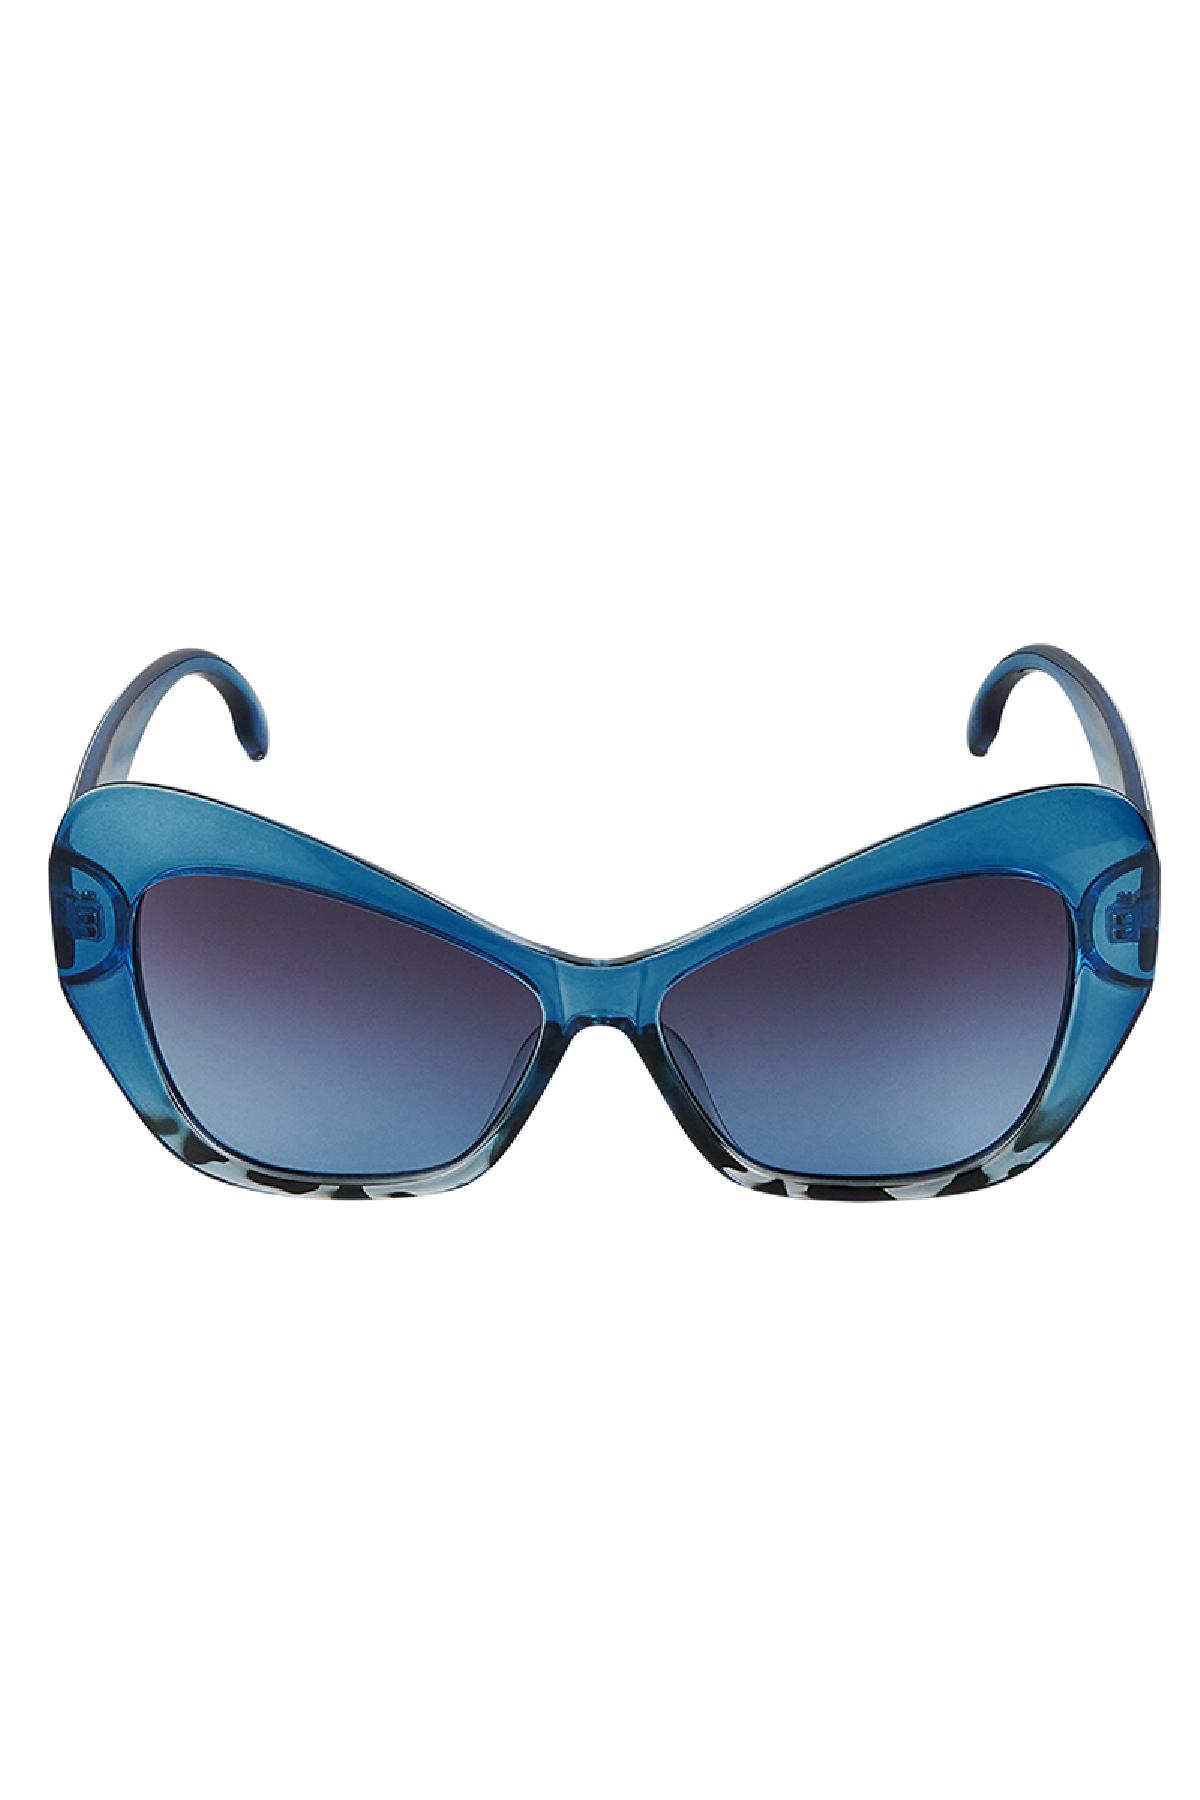 Sunglasses statement Blue PC One size Picture3